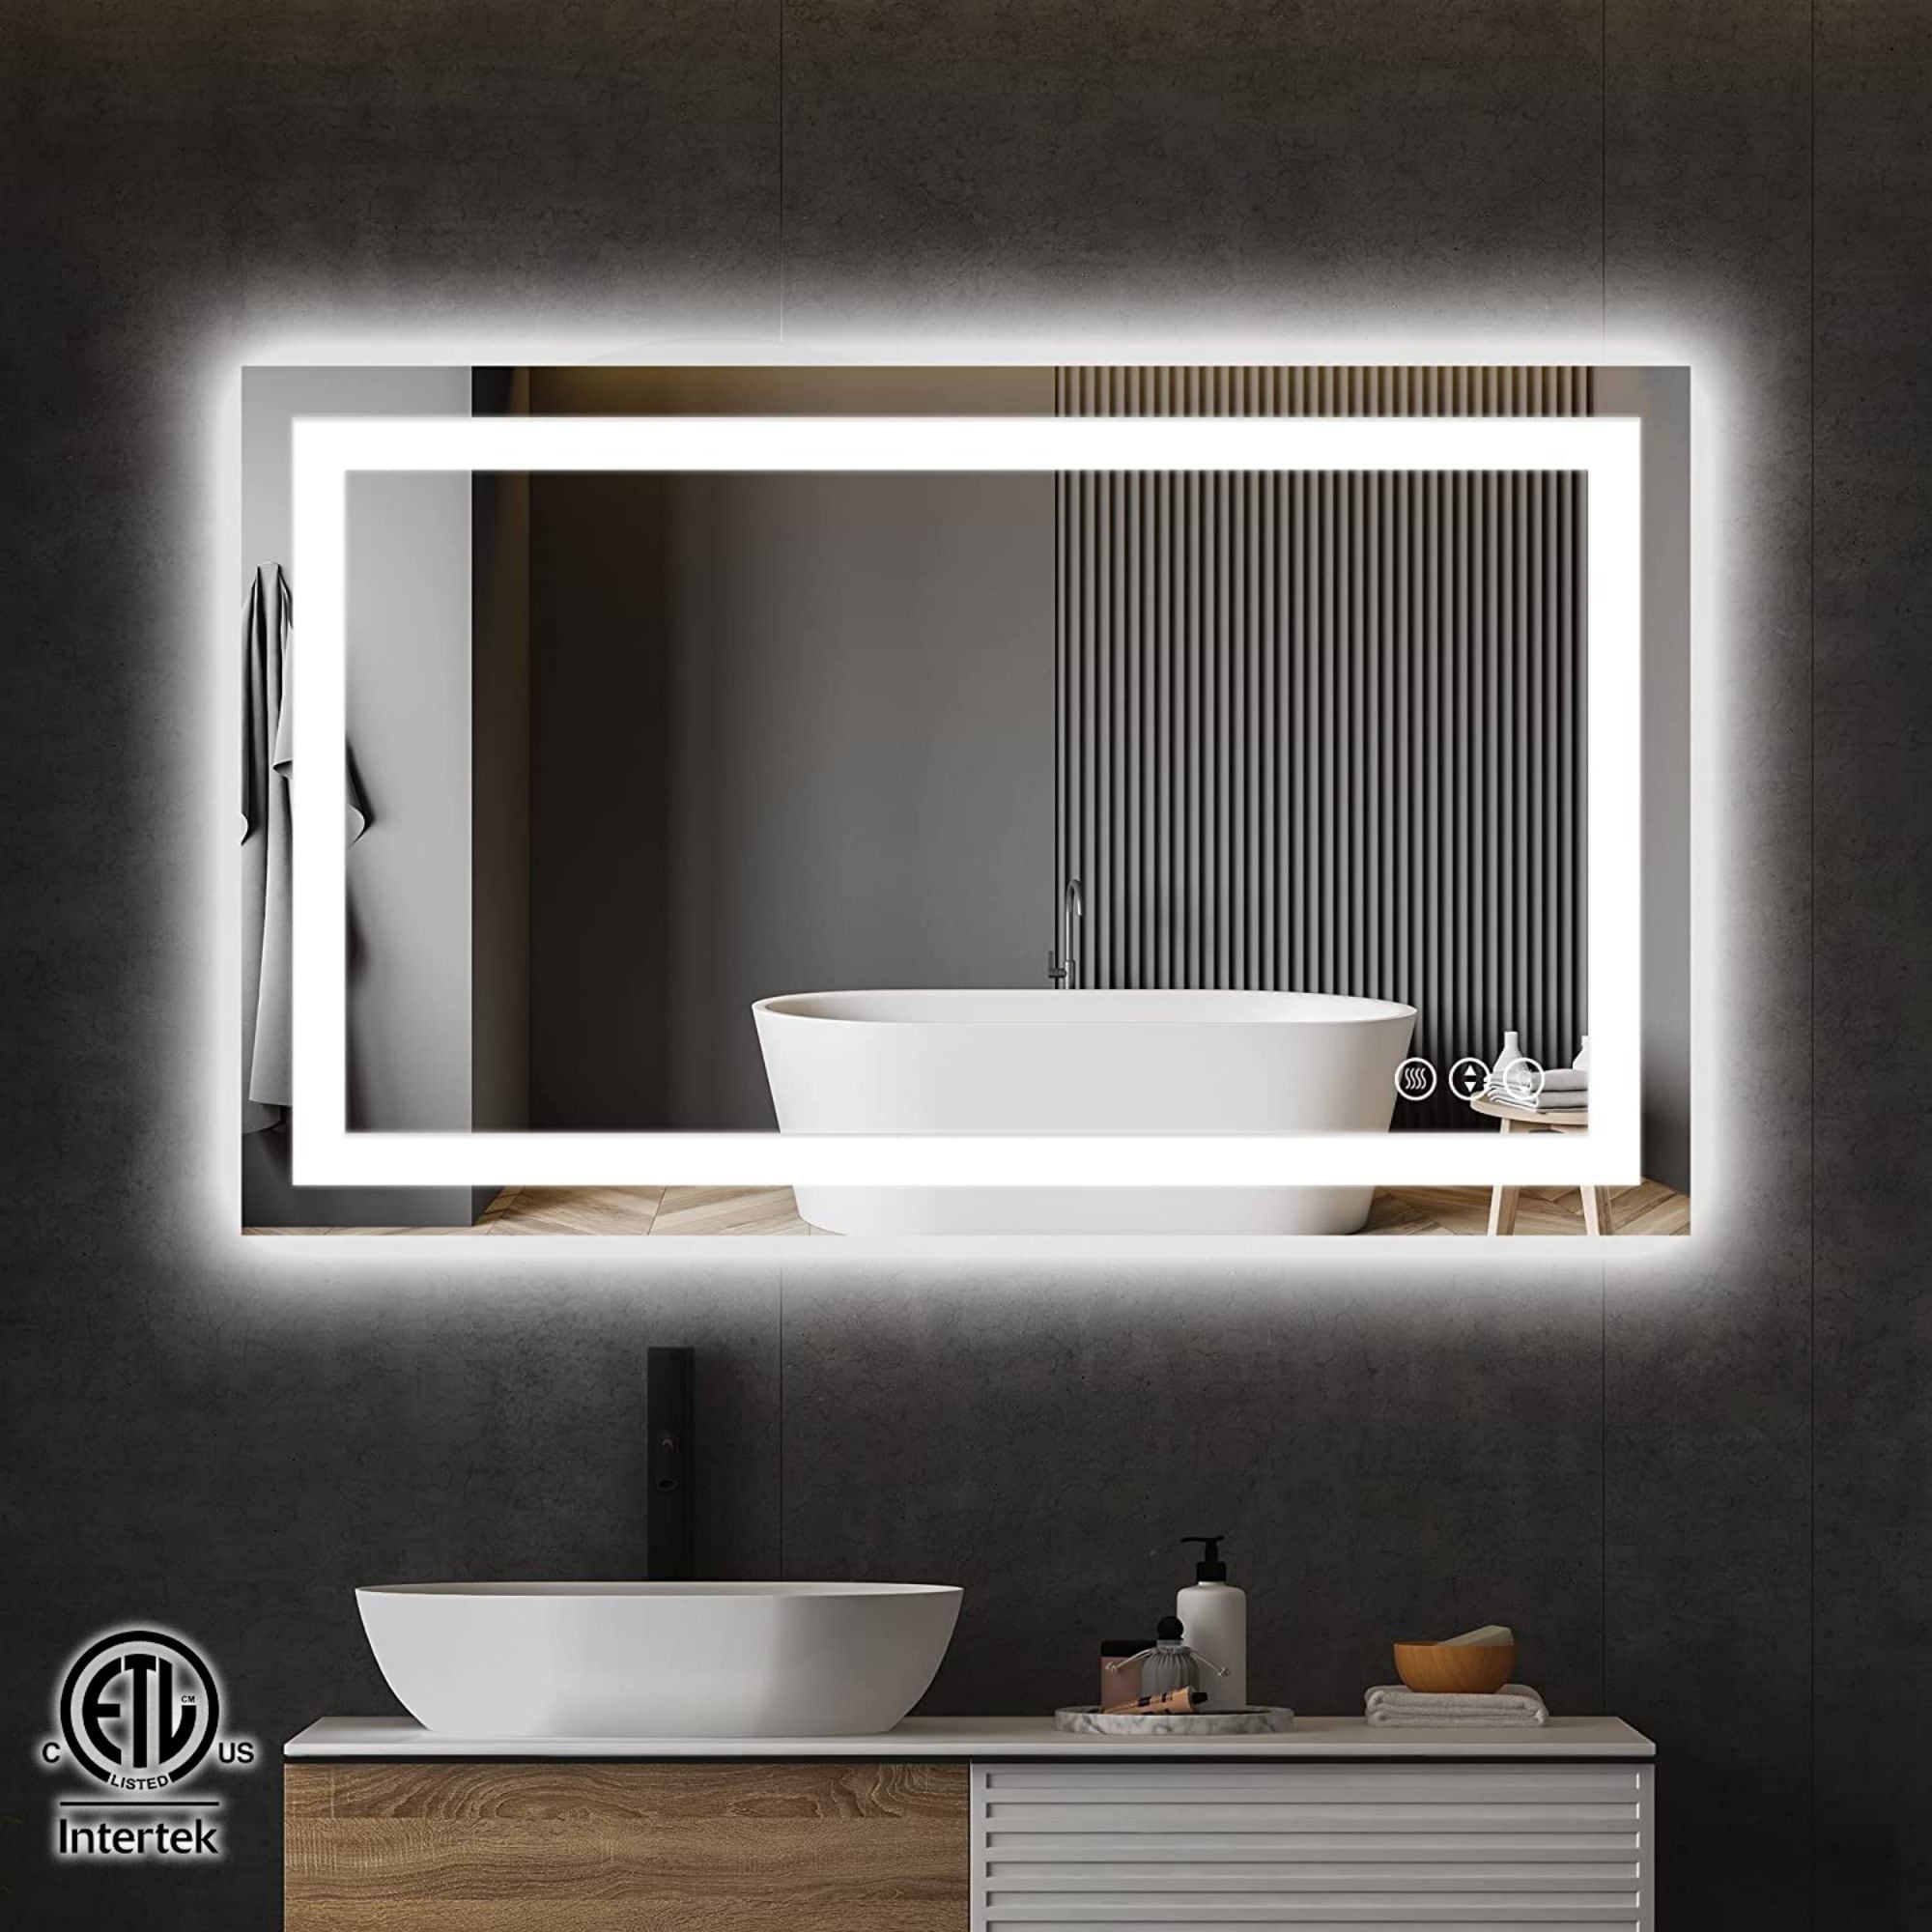 https://ak1.ostkcdn.com/images/products/is/images/direct/de97514404c6fee06f426b45480bcde2cba632f7/TOOLKISS-Anti-fog-Frameless-Vanity-Mirror-with-Backlit-and-Front-Light.jpg